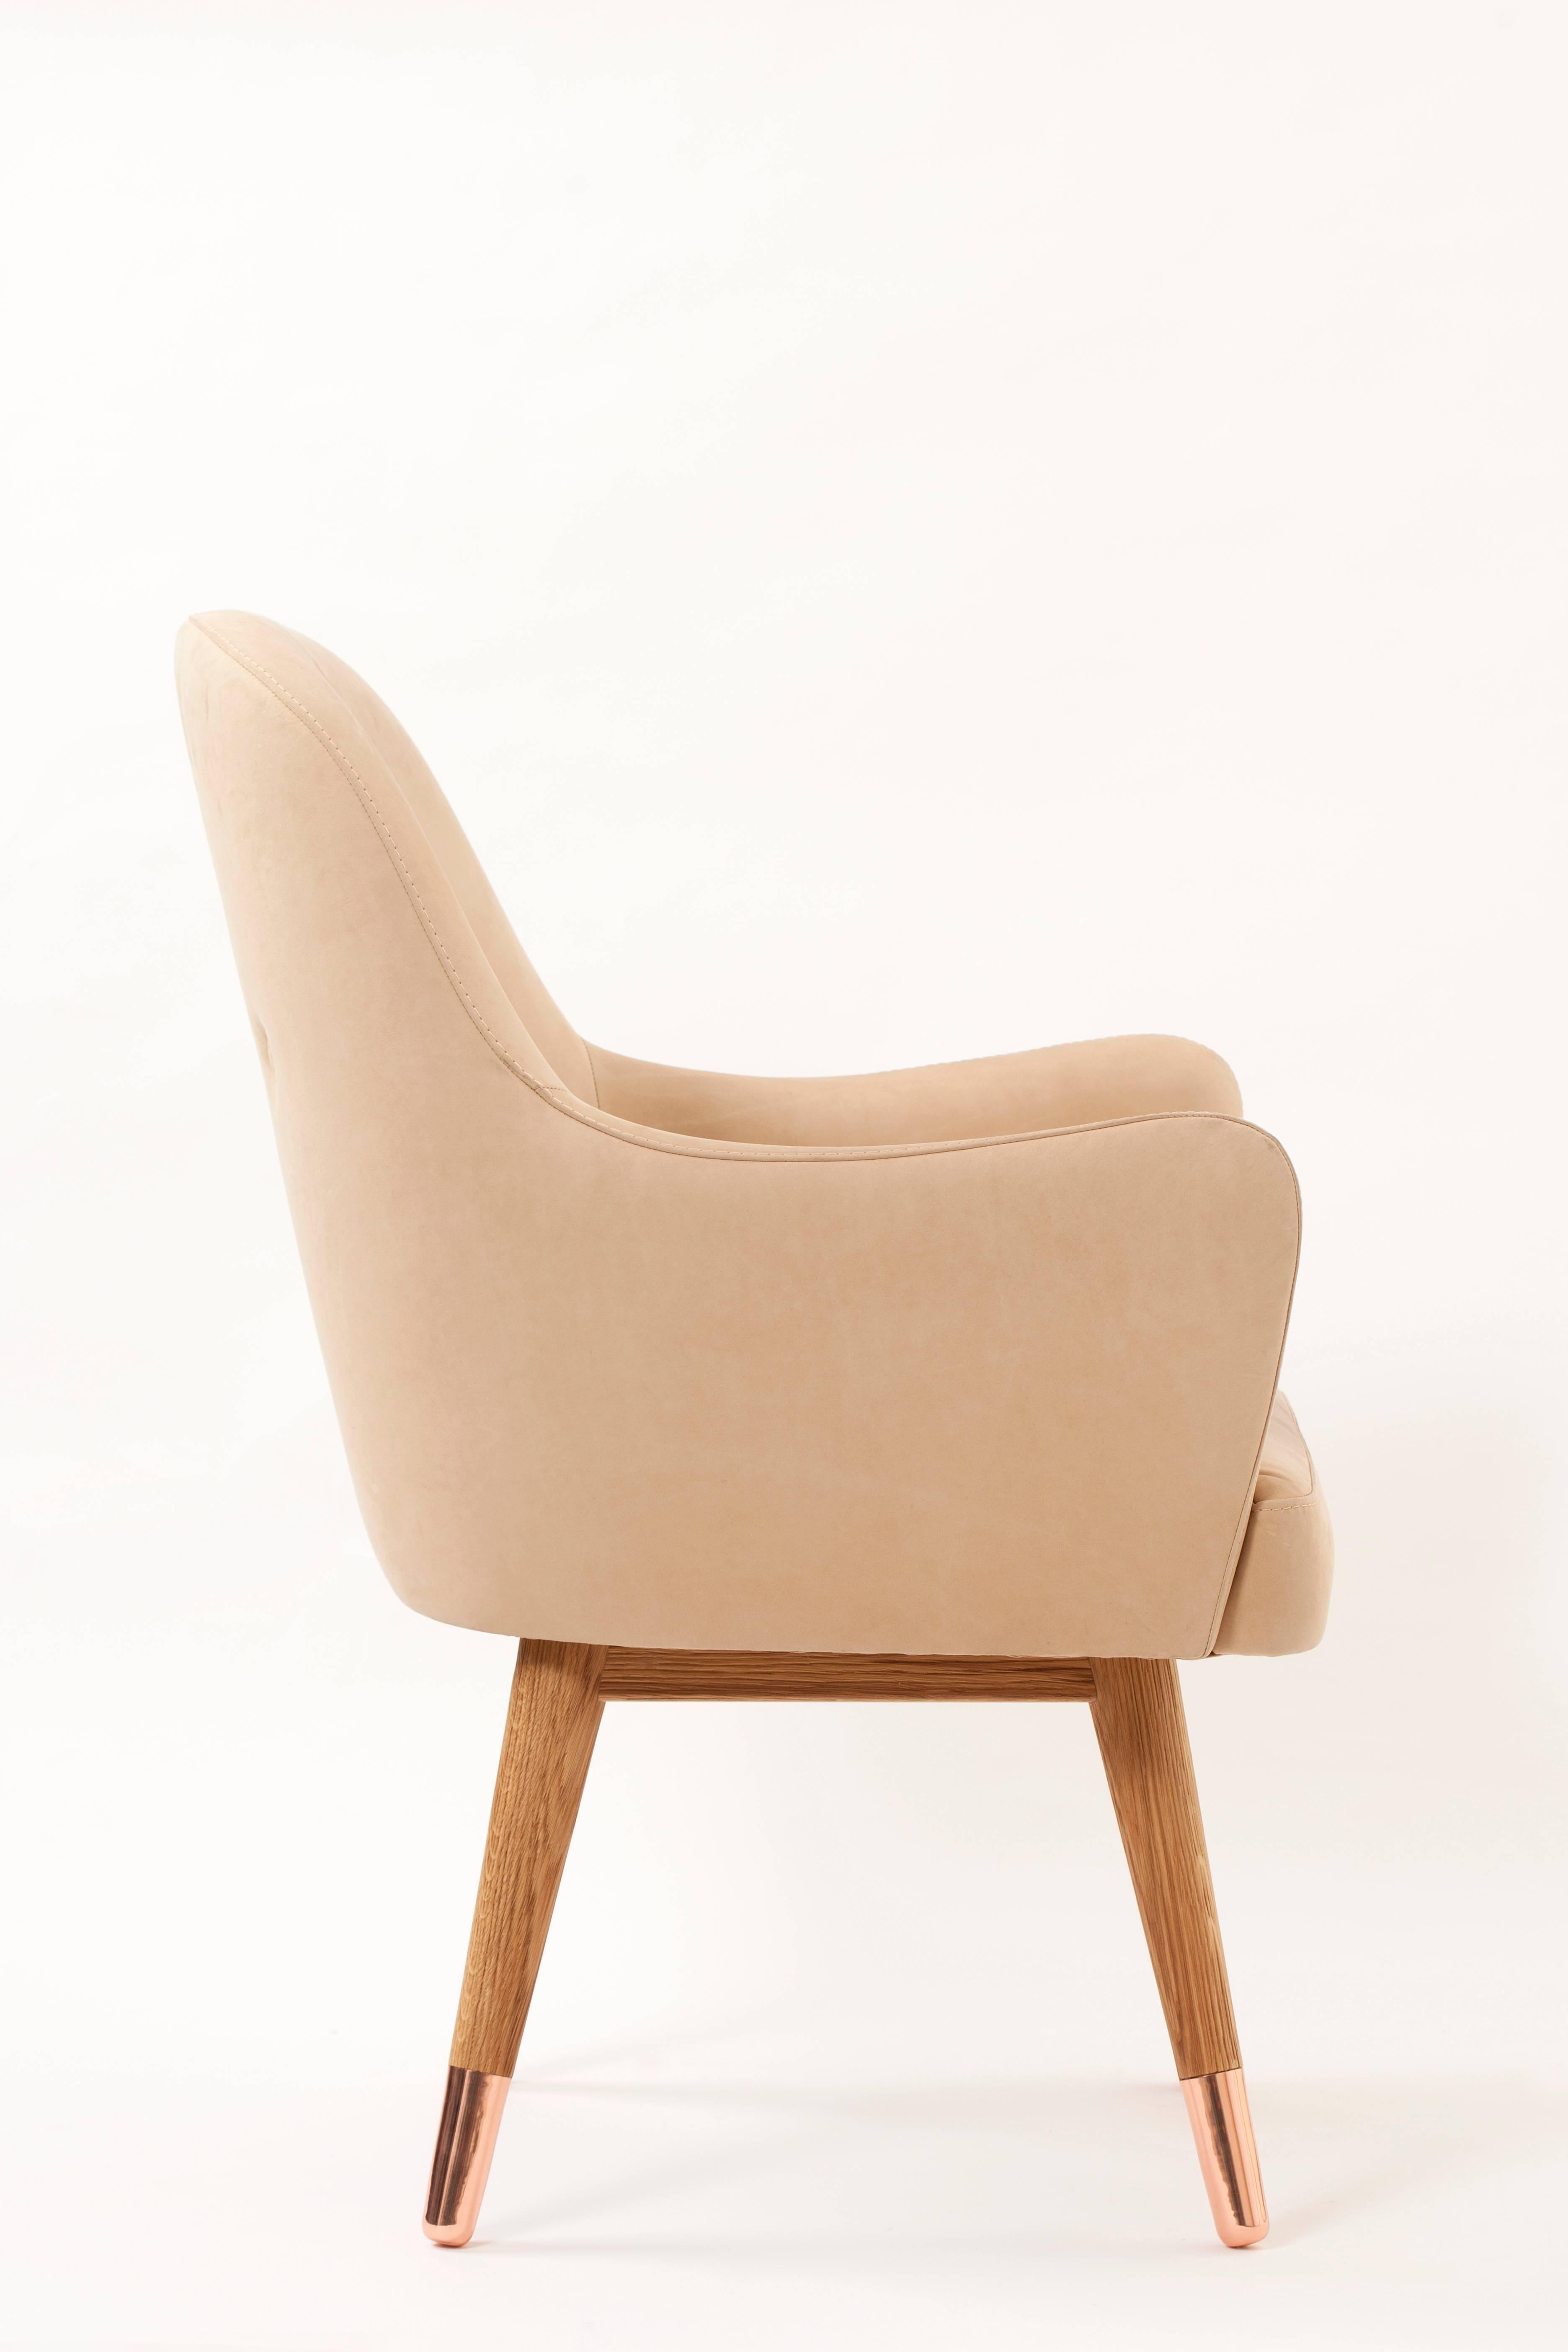 Wood Contemporary Dandy Chair with Beige Suede Leather, Walnut and Brass